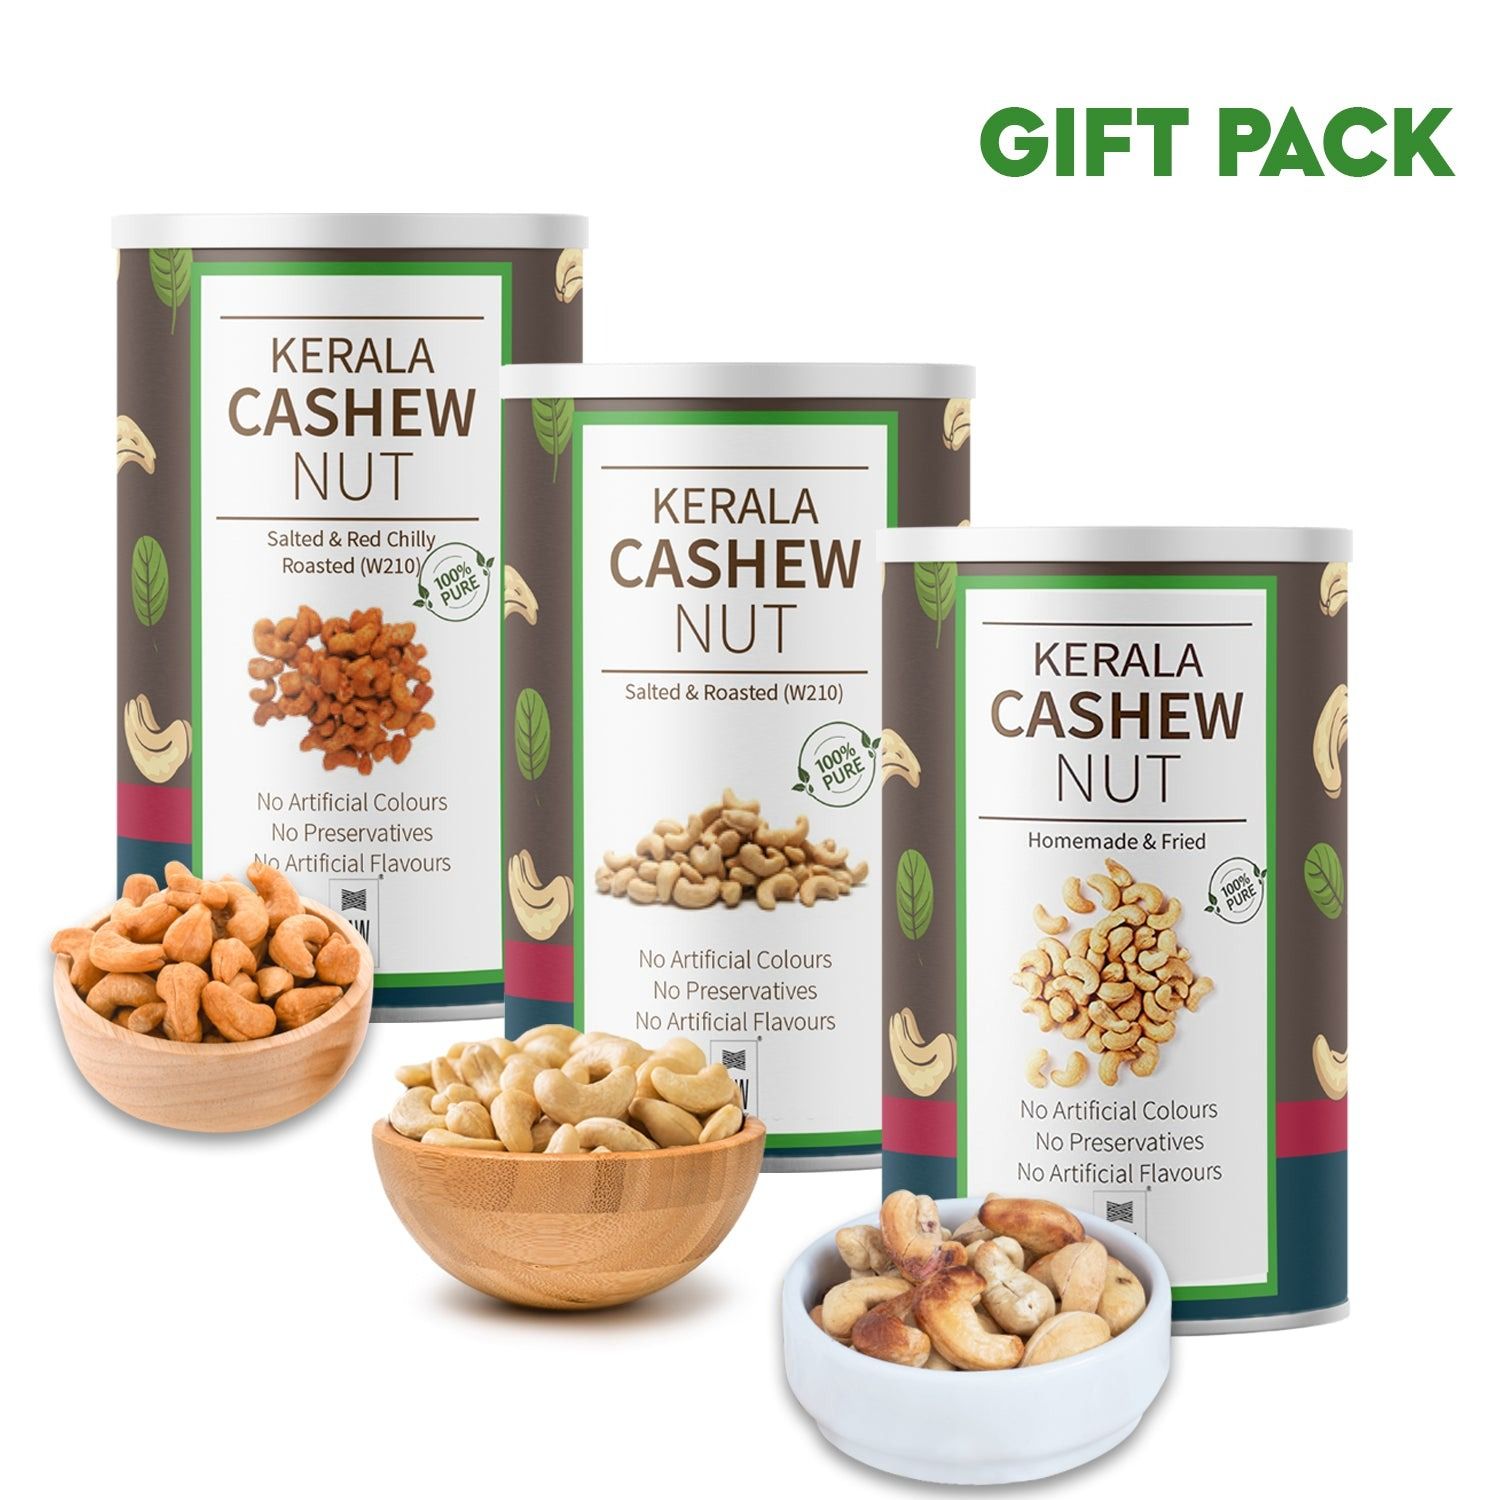 Special Gift Pack of Kerala Cashews (250 gm Unroasted + 250 gm Roasted & Salted + 250 gm Fried Cashew